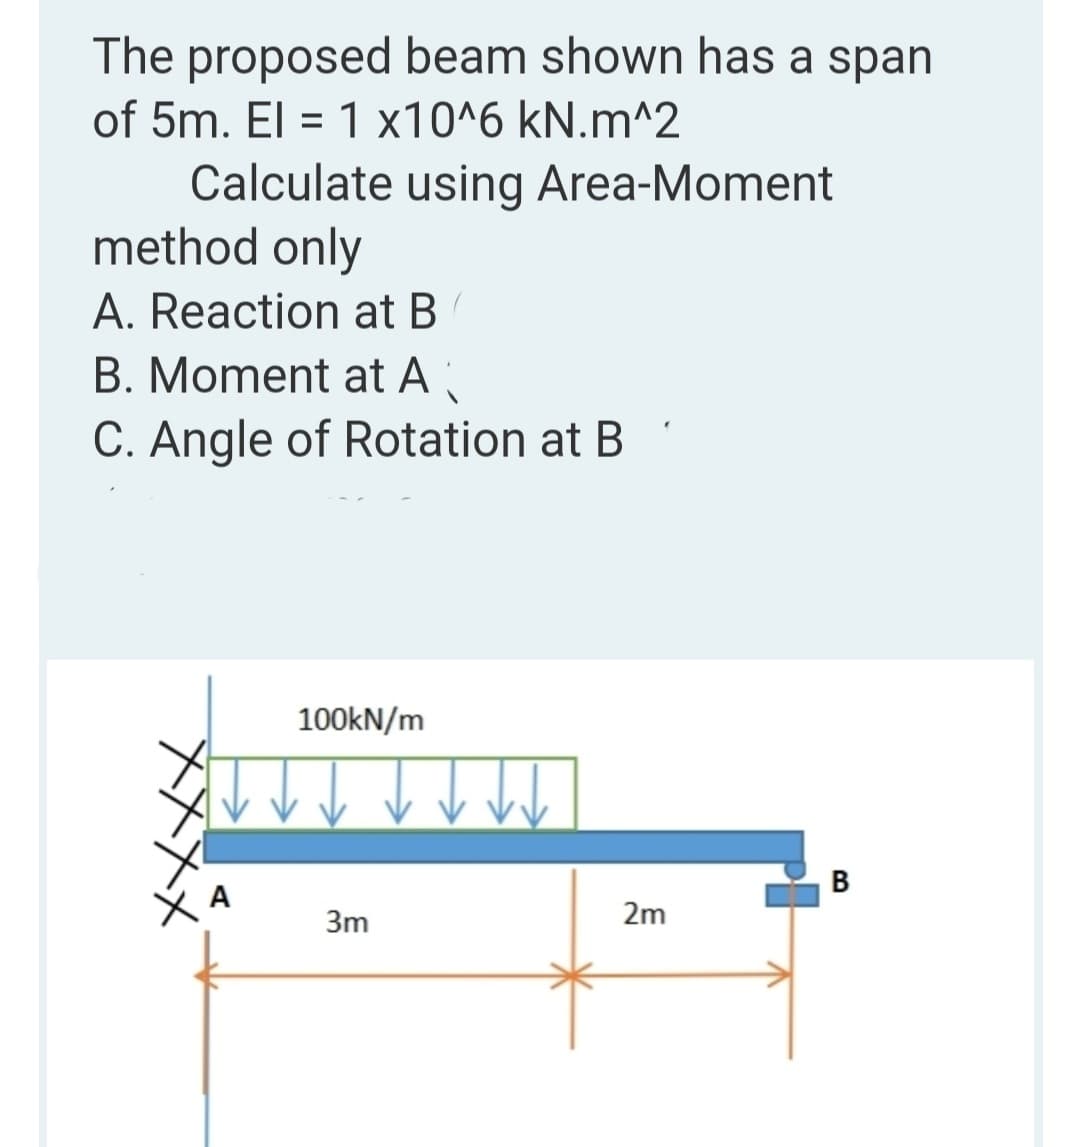 The proposed beam shown has a span
of 5m. El = 1 x10^6 kN.m^2
Calculate using Area-Moment
method only
A. Reaction at B
B. Moment at A
C. Angle of Rotation at B
100KN/m
A
3m
2m
